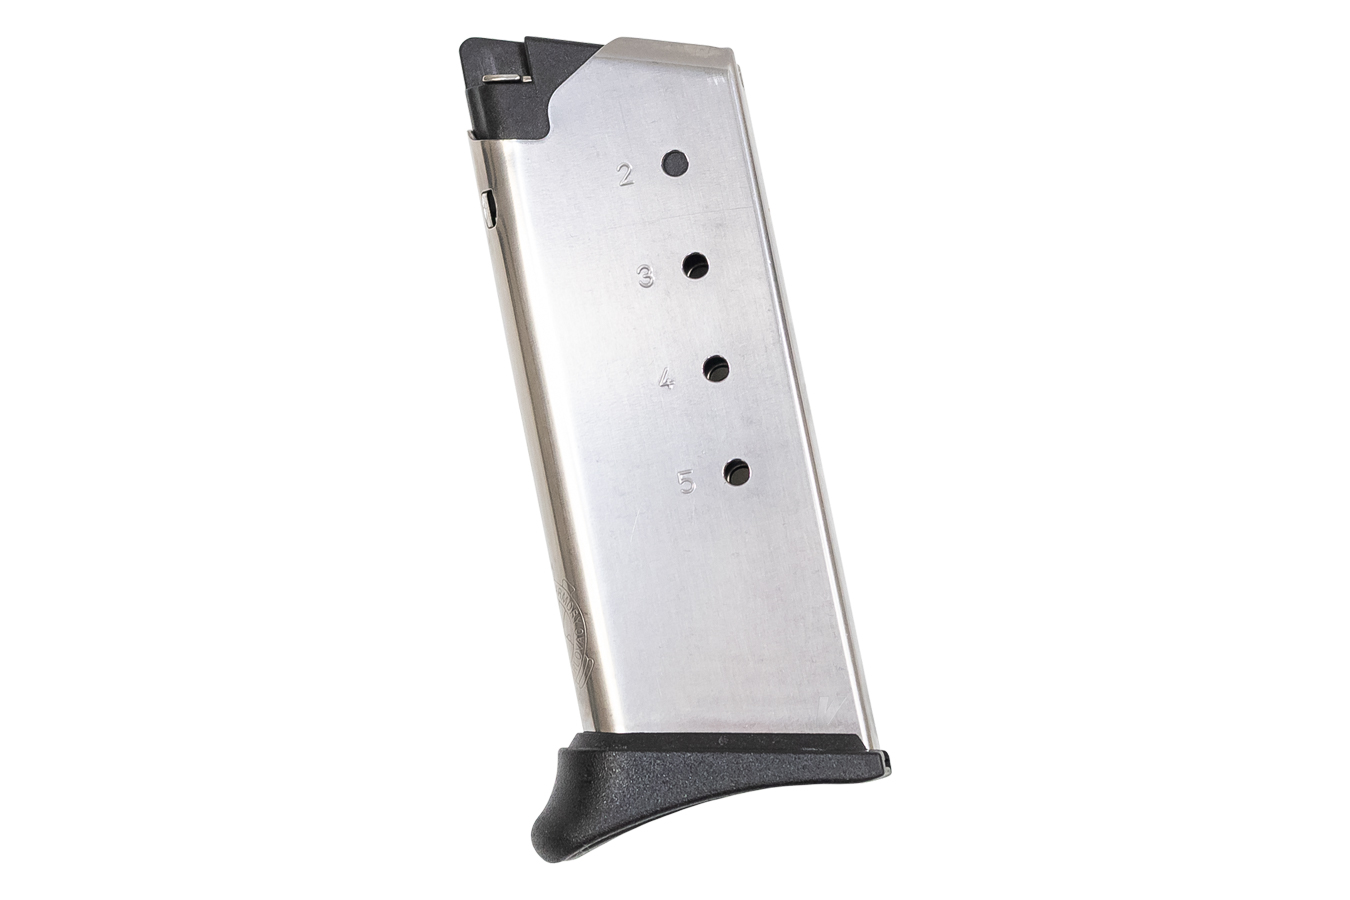 Mod.2　Plate　Hook　Springfield　Outdoor　ACP　XDS　Factory　Magazine　Sportsman's　45　Superstore　5-Round　with